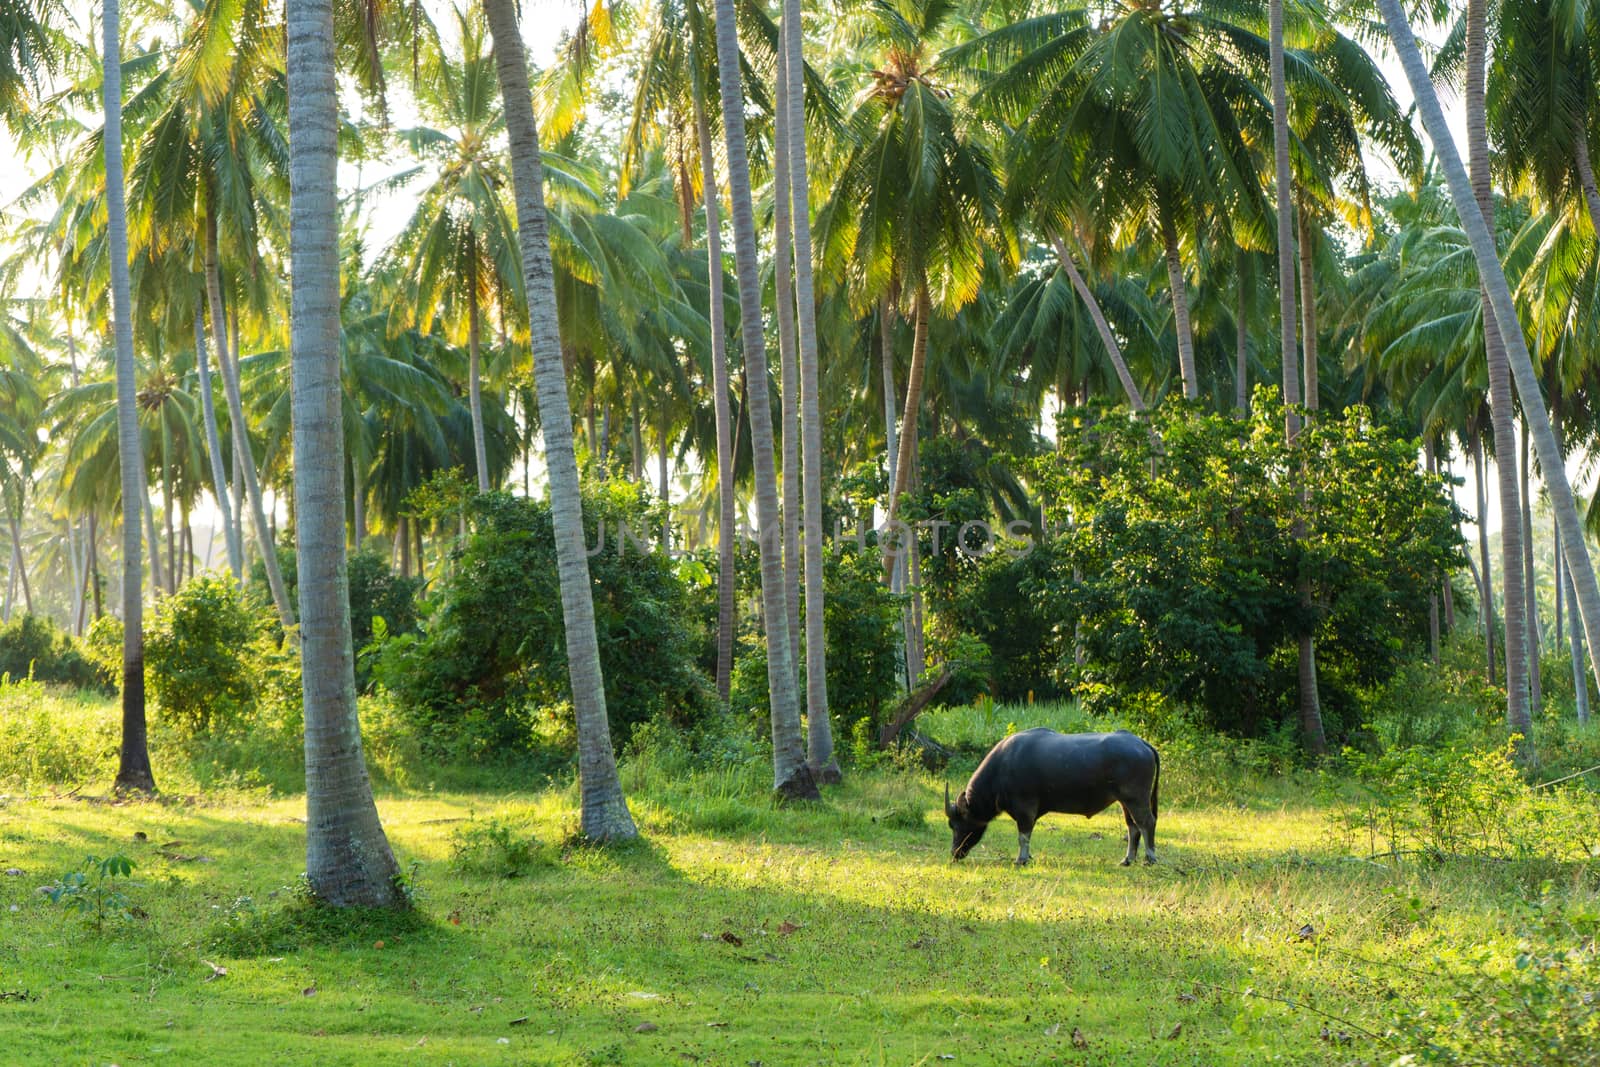 A buffalo with large horns grazes on the lawn in a green tropical jungle. by Try_my_best